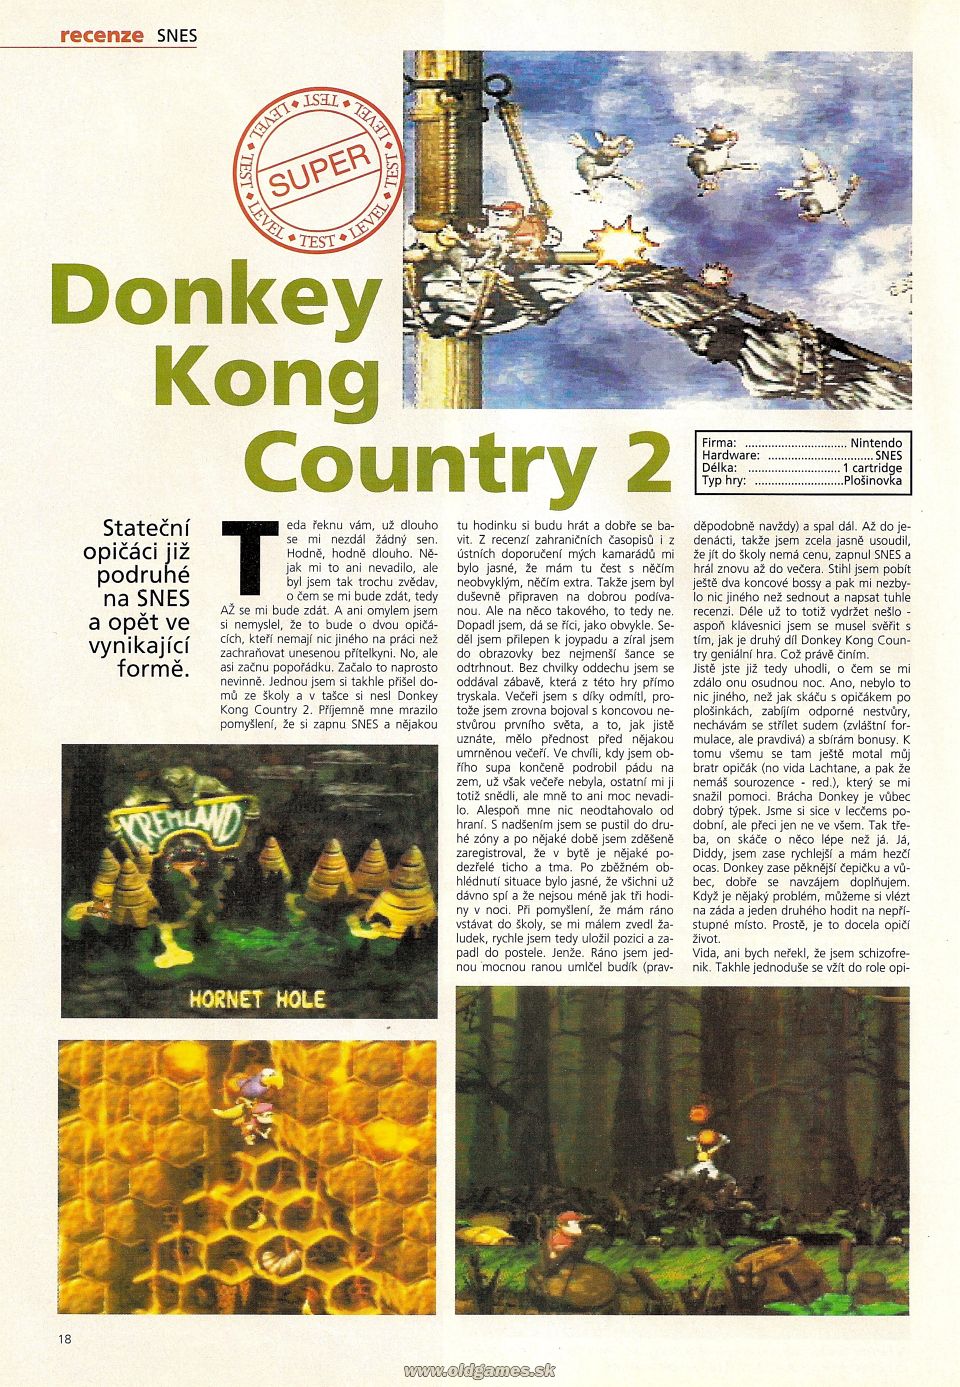 download donkey kong country 2 snes